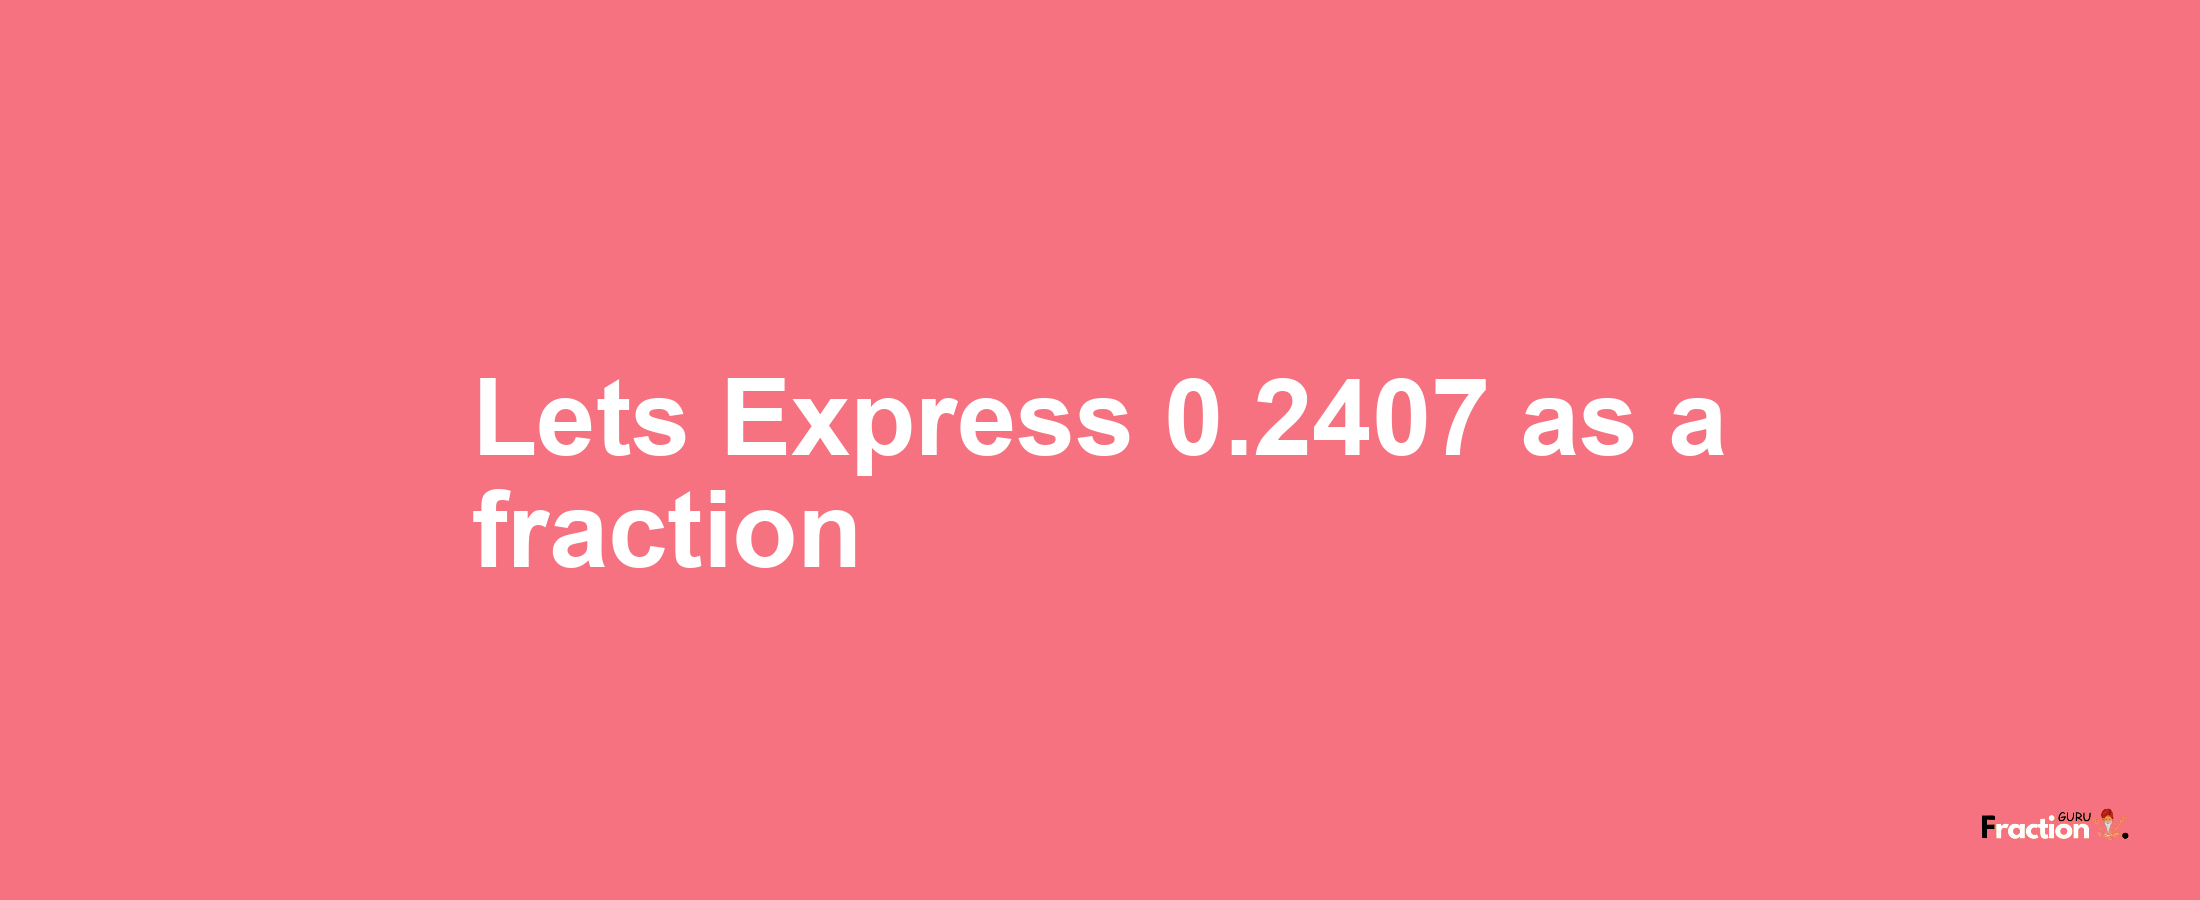 Lets Express 0.2407 as afraction